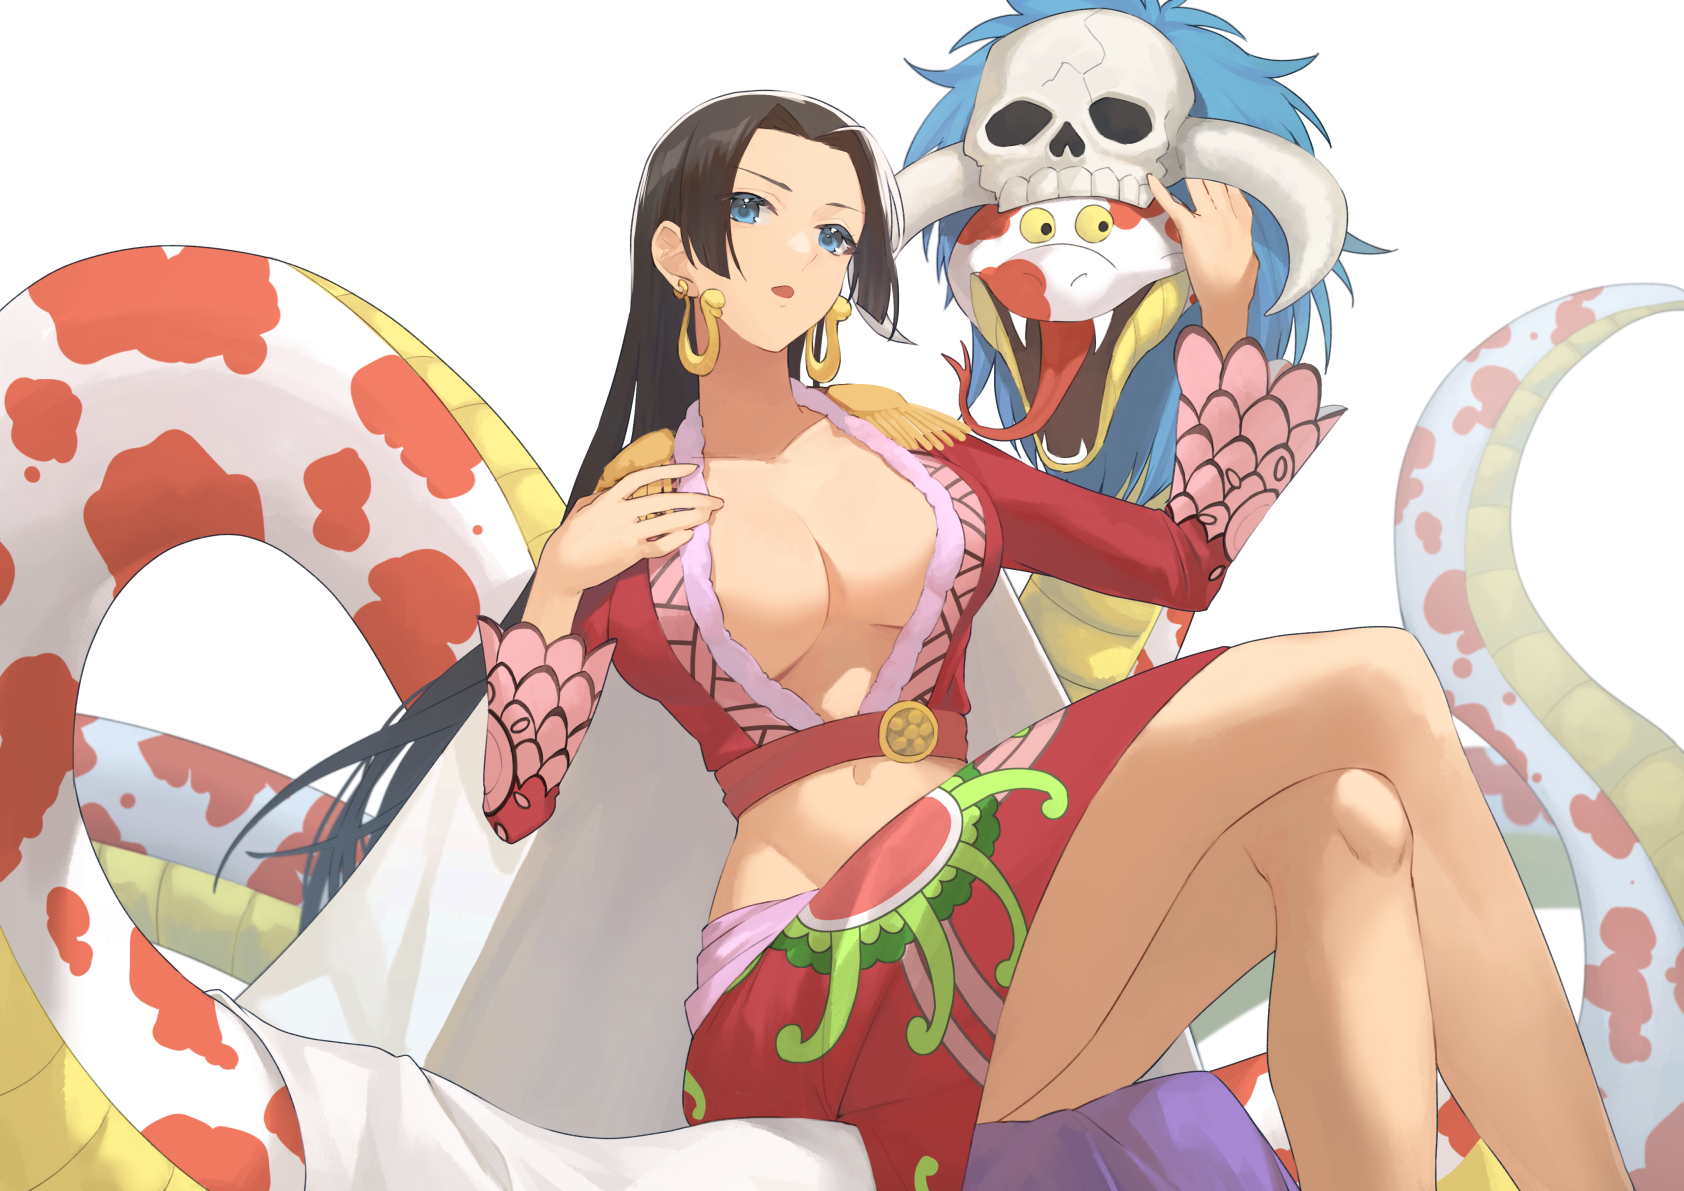 __boa_hancock_and_salome_one_piece_drawn_by_ao_tsukushi__aaaa605749741a1ed39ab443a50151d2.png